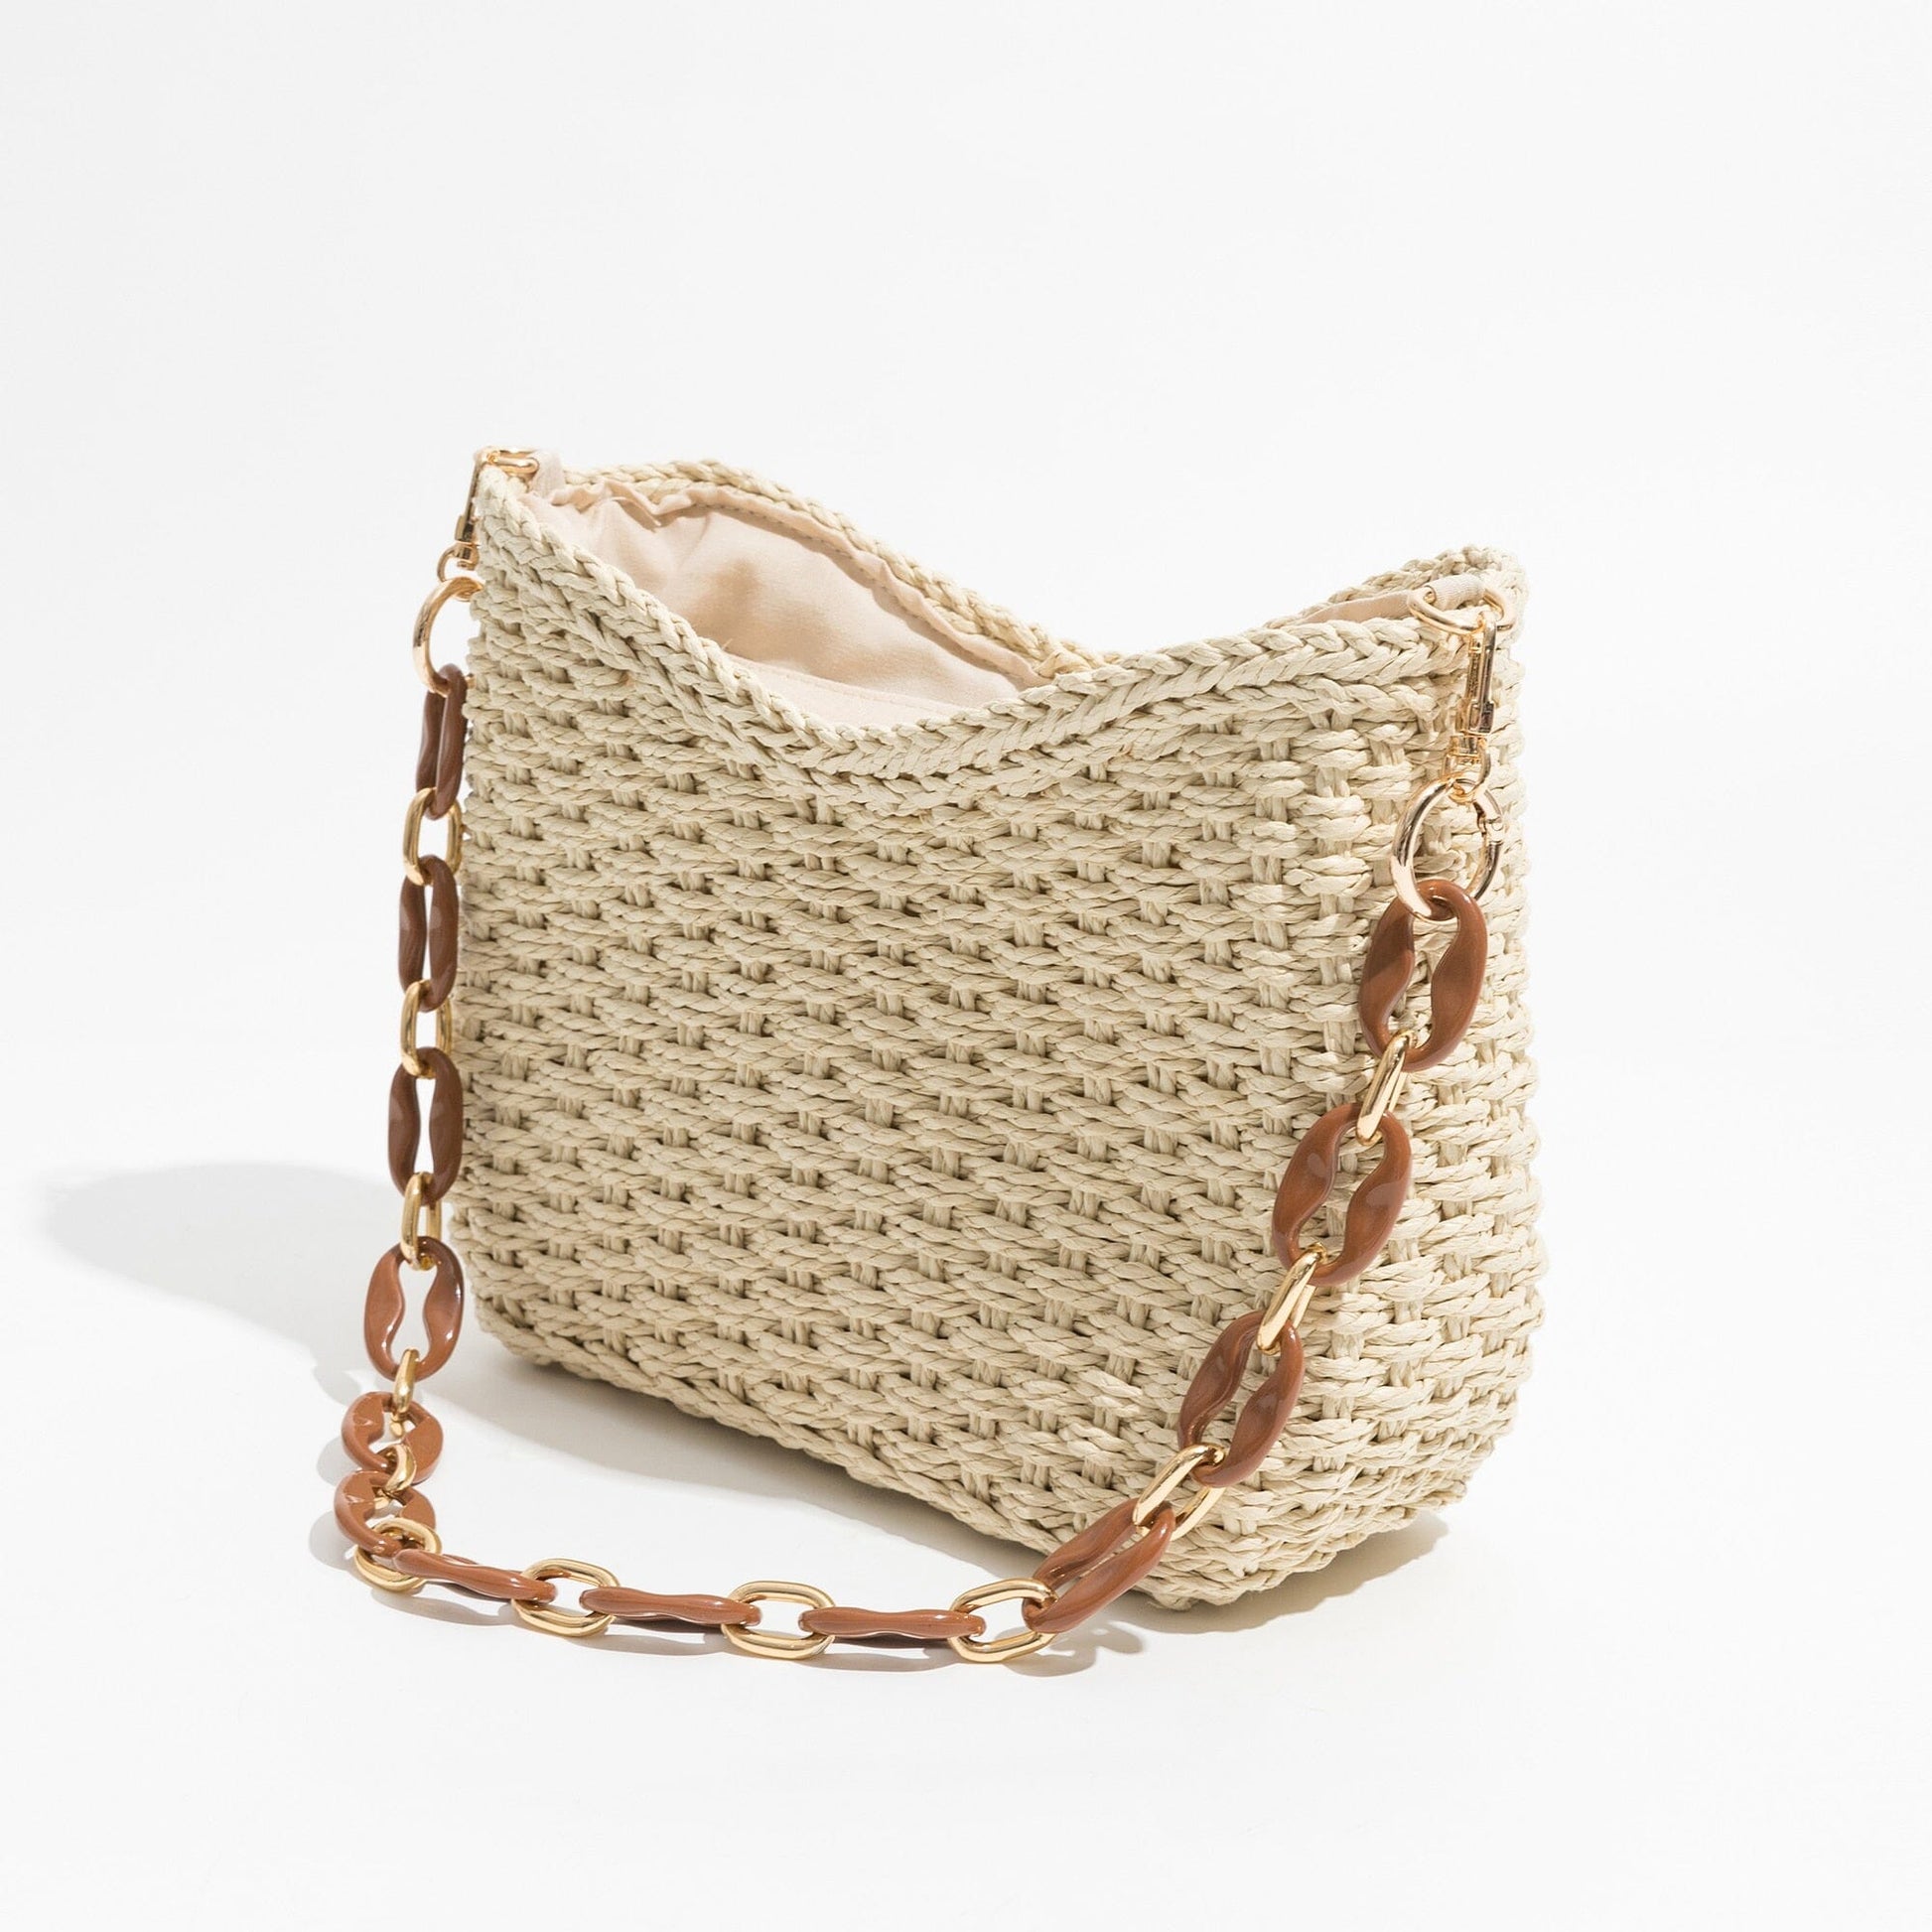 Straw Bag With Chain Strap The Store Bags 